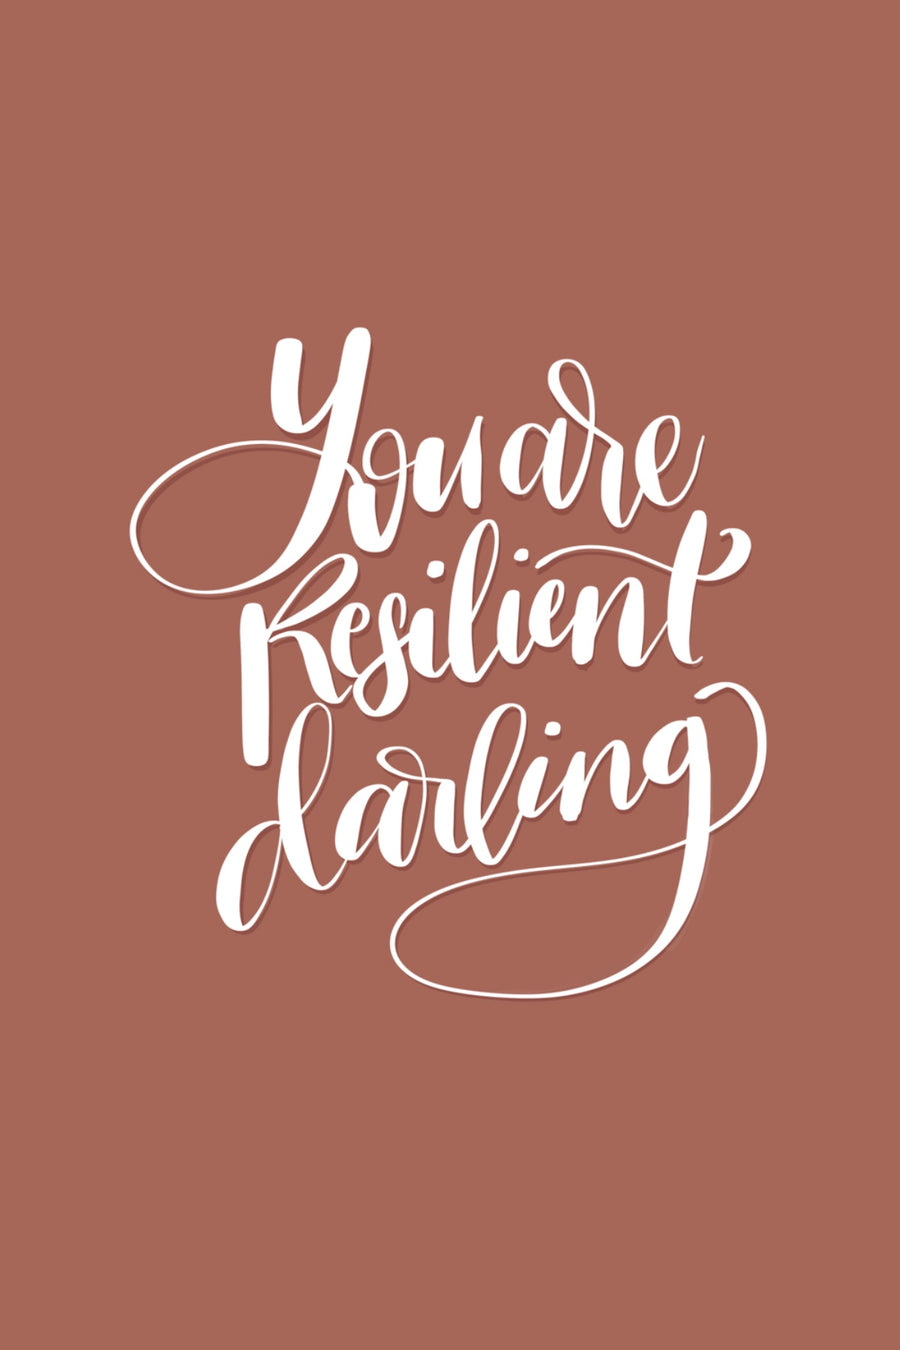 Resilient, Darling